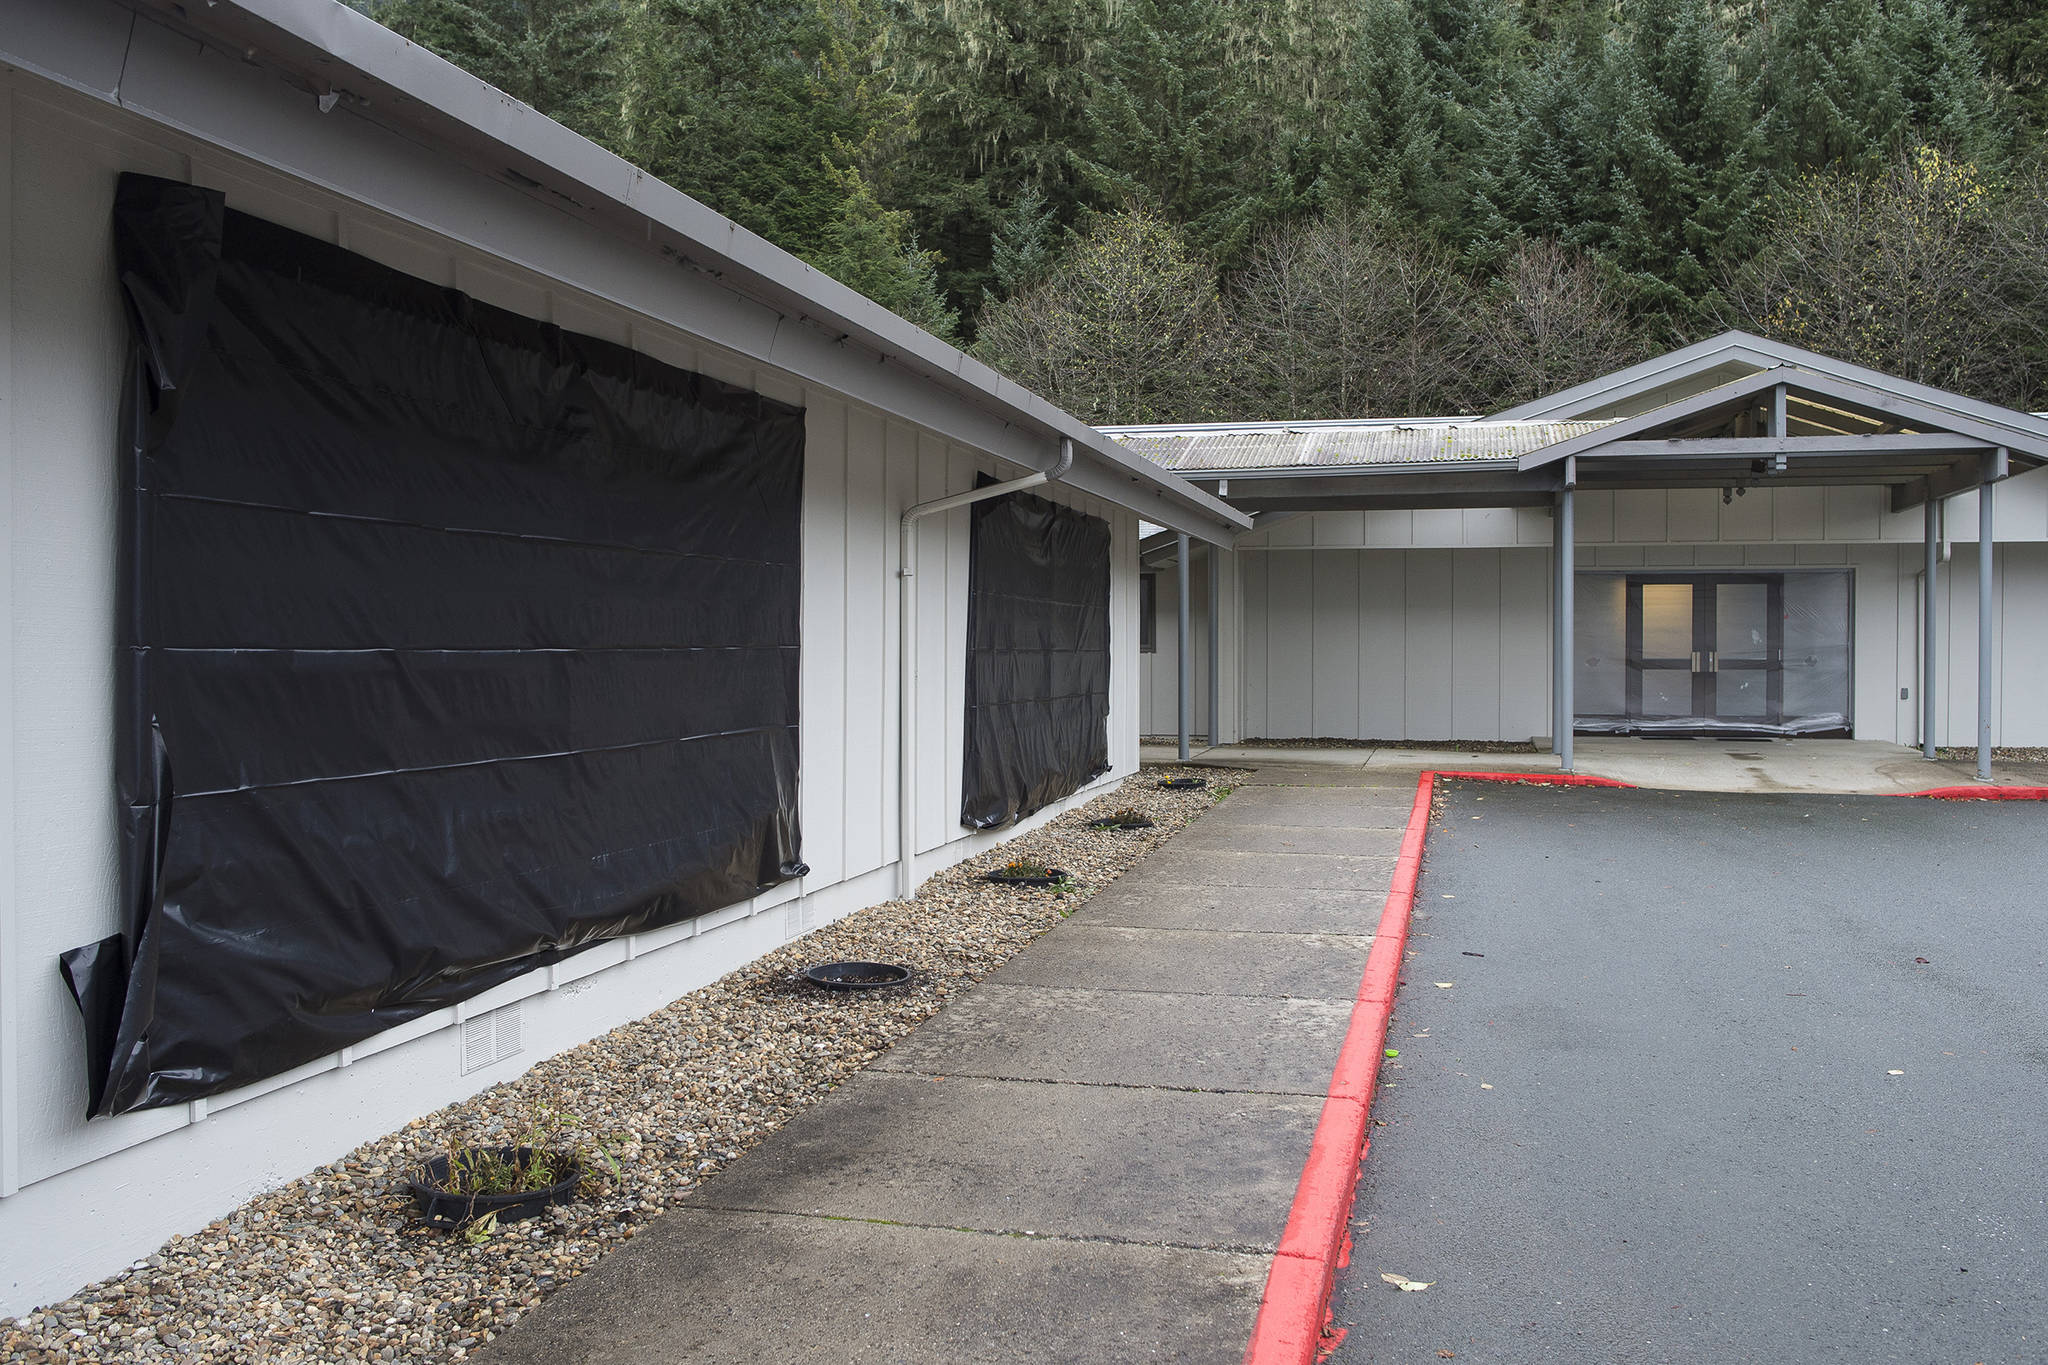 Broken windows are covered up at The Church of Jesus Christ of Latter-day Saints on Wednesday, Oct. 24, 2018, after reports of vandalism on Monday night. (Michael Penn | Juneau Empire File)